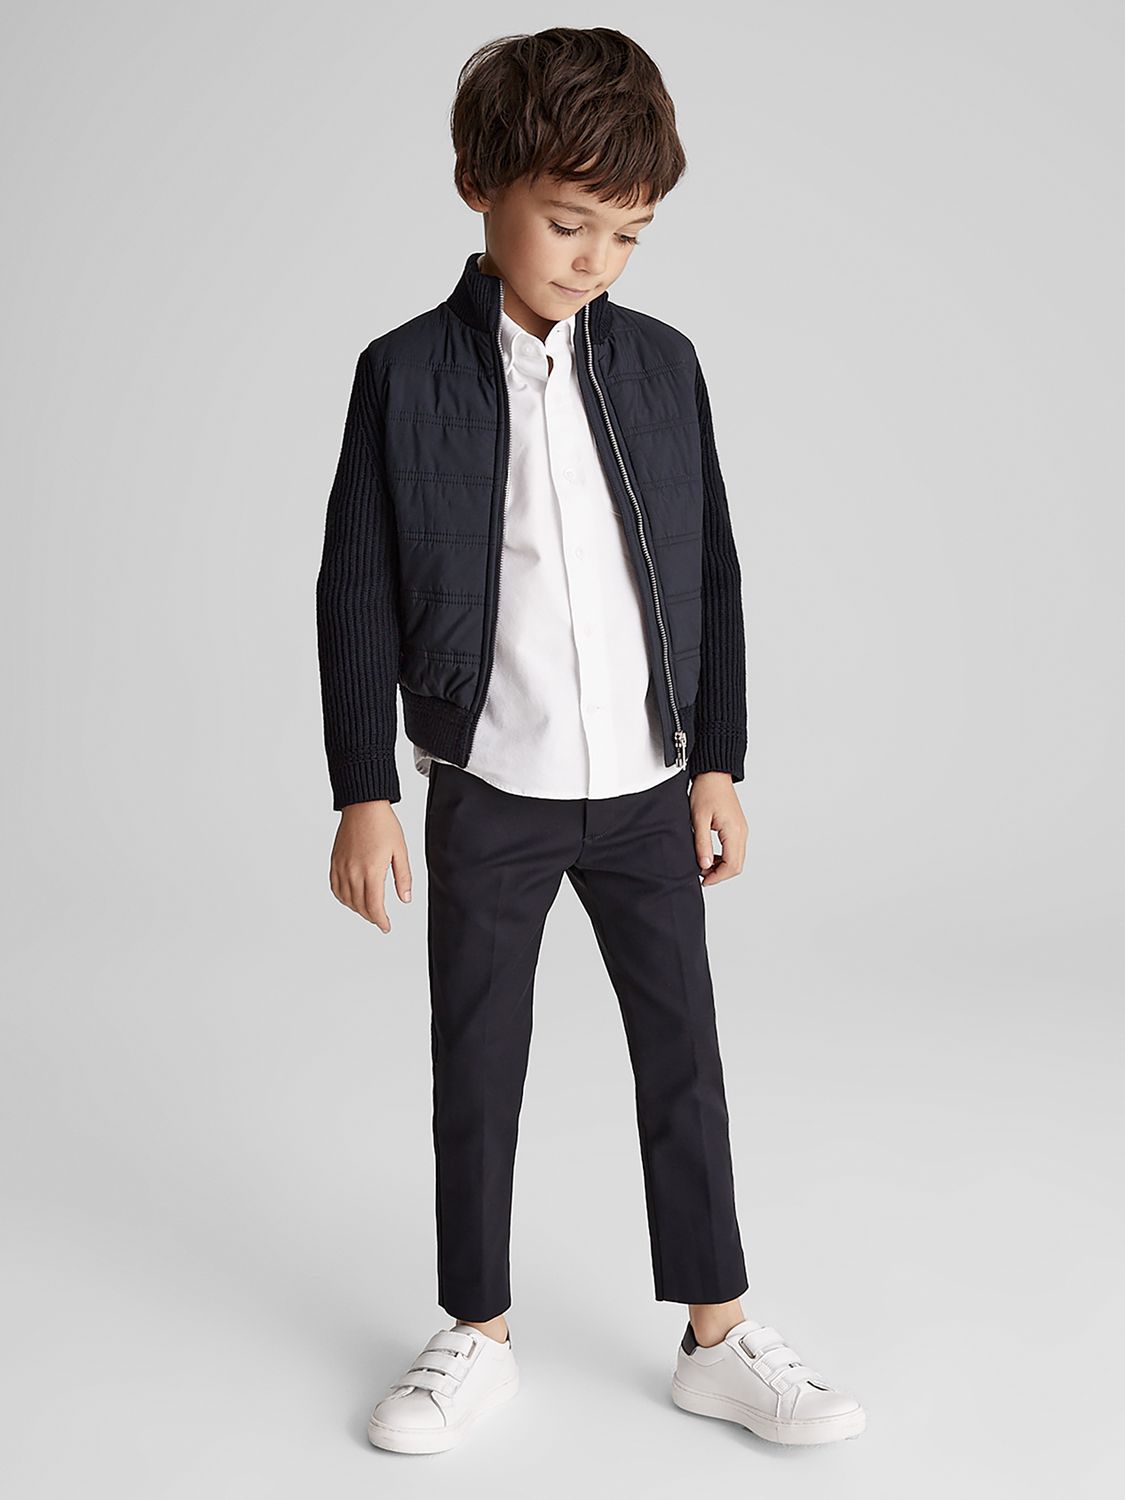 Reiss Kids' Trainer Zip Up Quilted Jacket, Navy at John Lewis & Partners